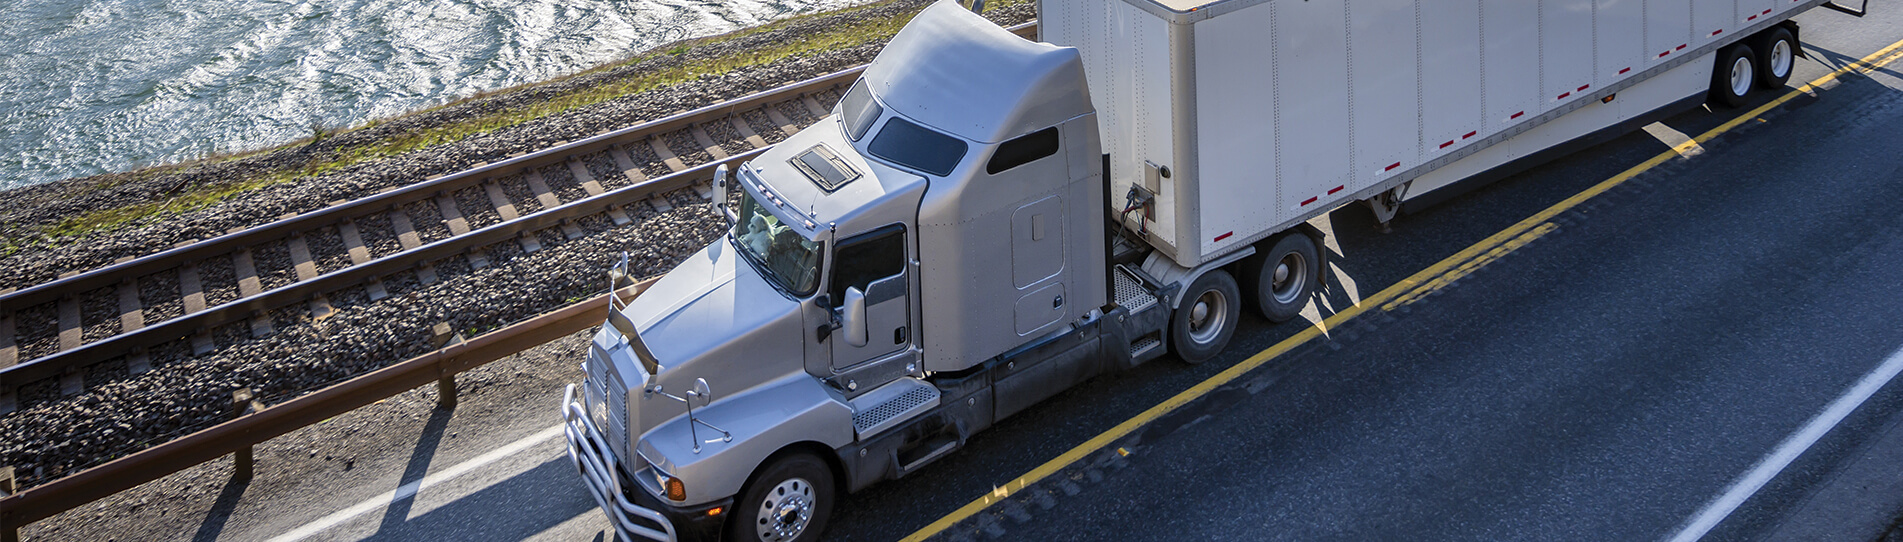 Fort Worth Trucking Company, Trucking Services and Freight Forwarding Services